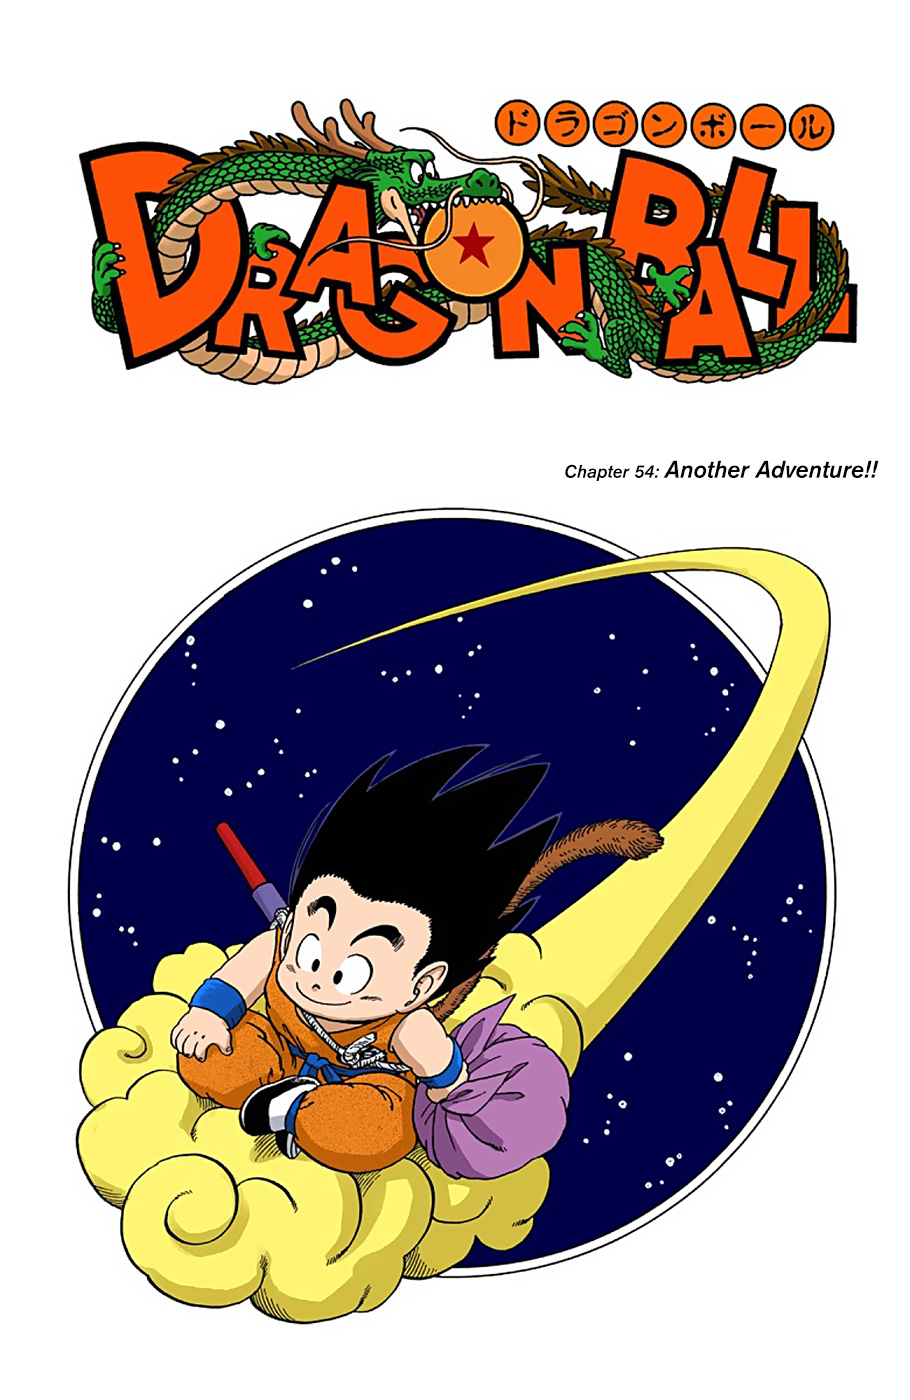 Dragon Ball Full Color Edition Vol. 4 Ch. 54 Another Adventure!!